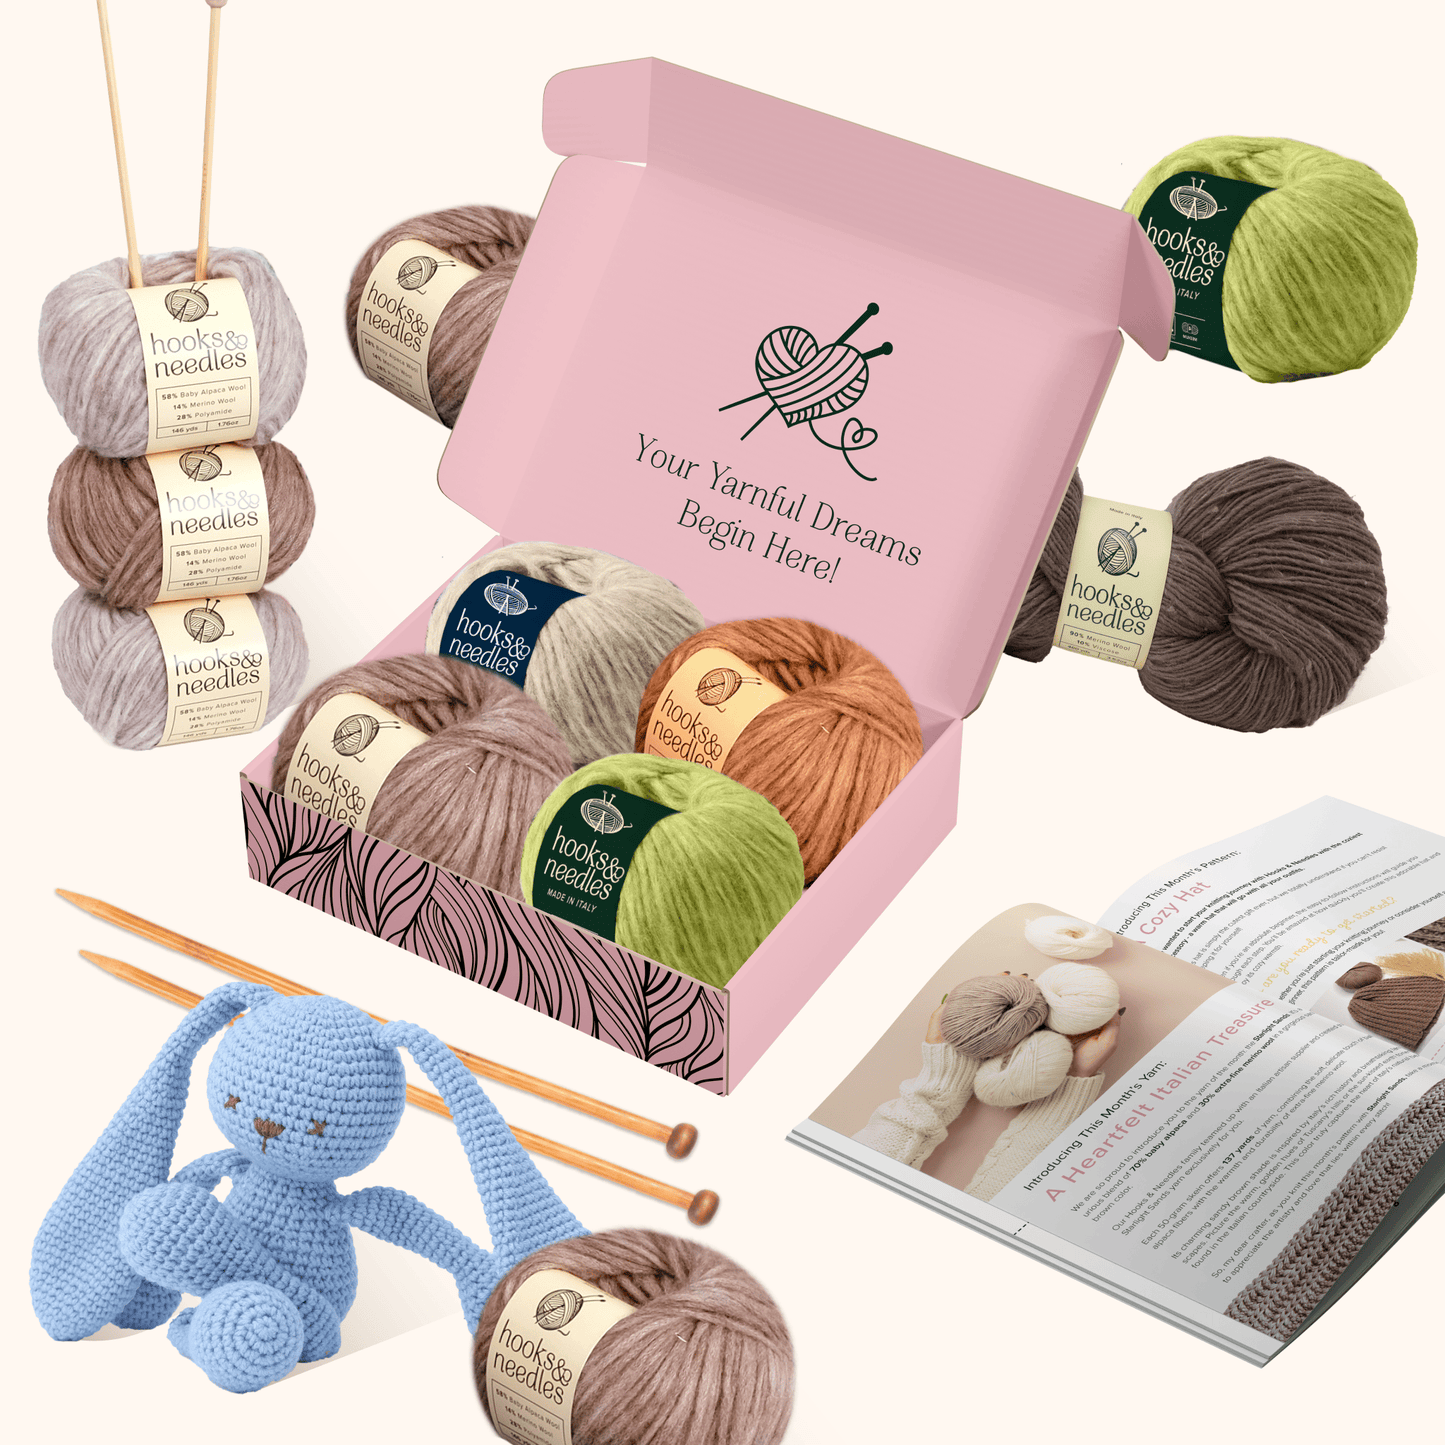 A [6-Month-Prepaid] Hooks & Needles Subscription Box #10 with various yarn balls, bamboo needles, a pattern book, and a finished blue rabbit project on a creamy background.